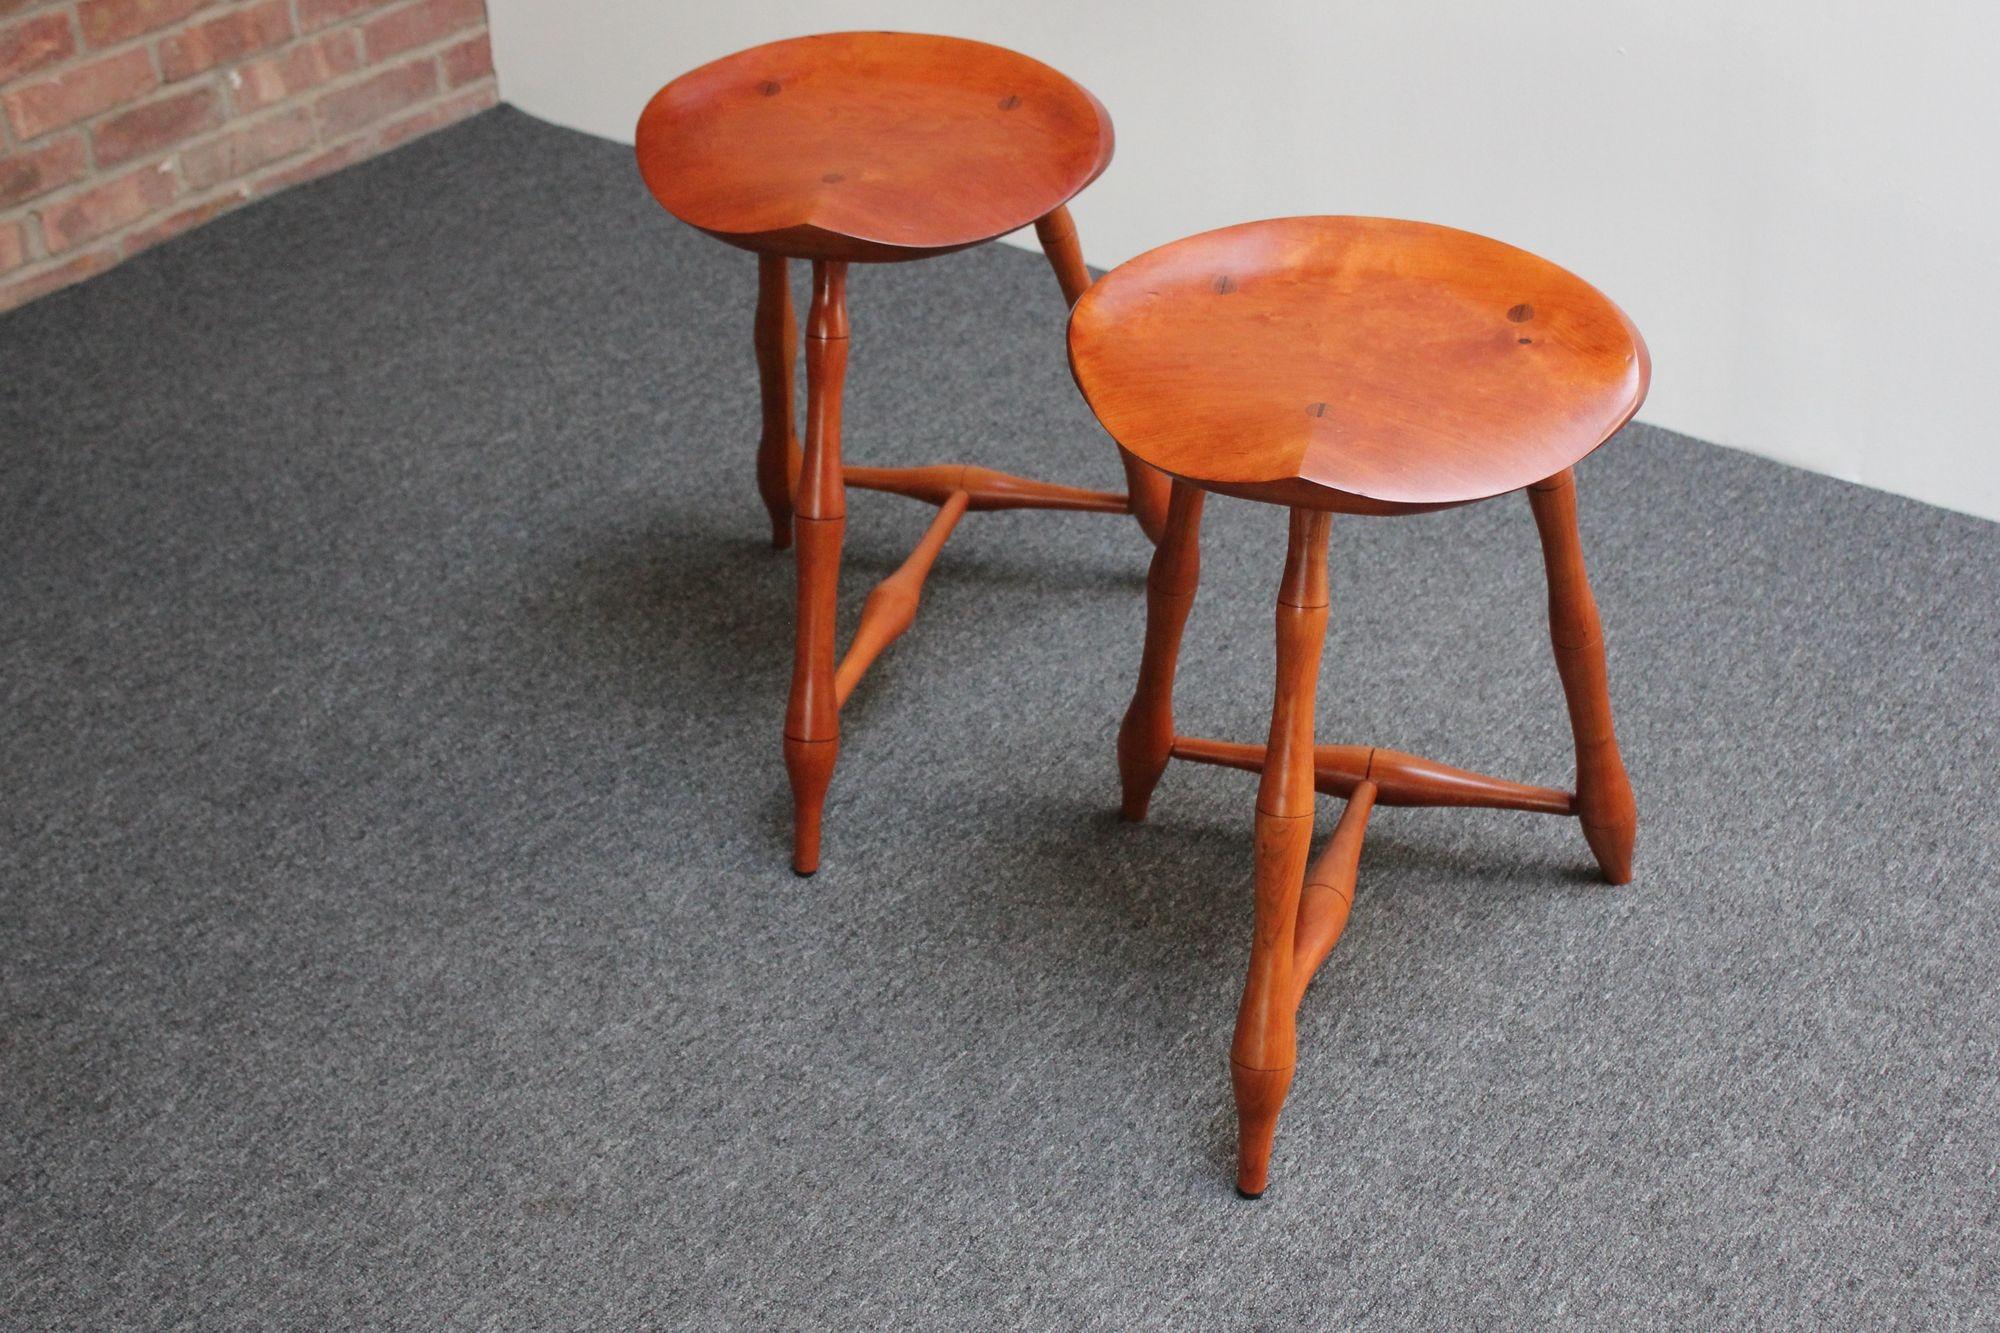 Pair of Vintage Studio Craft Windsor-Style Three Legged Low Stools in Cherrywood For Sale 12